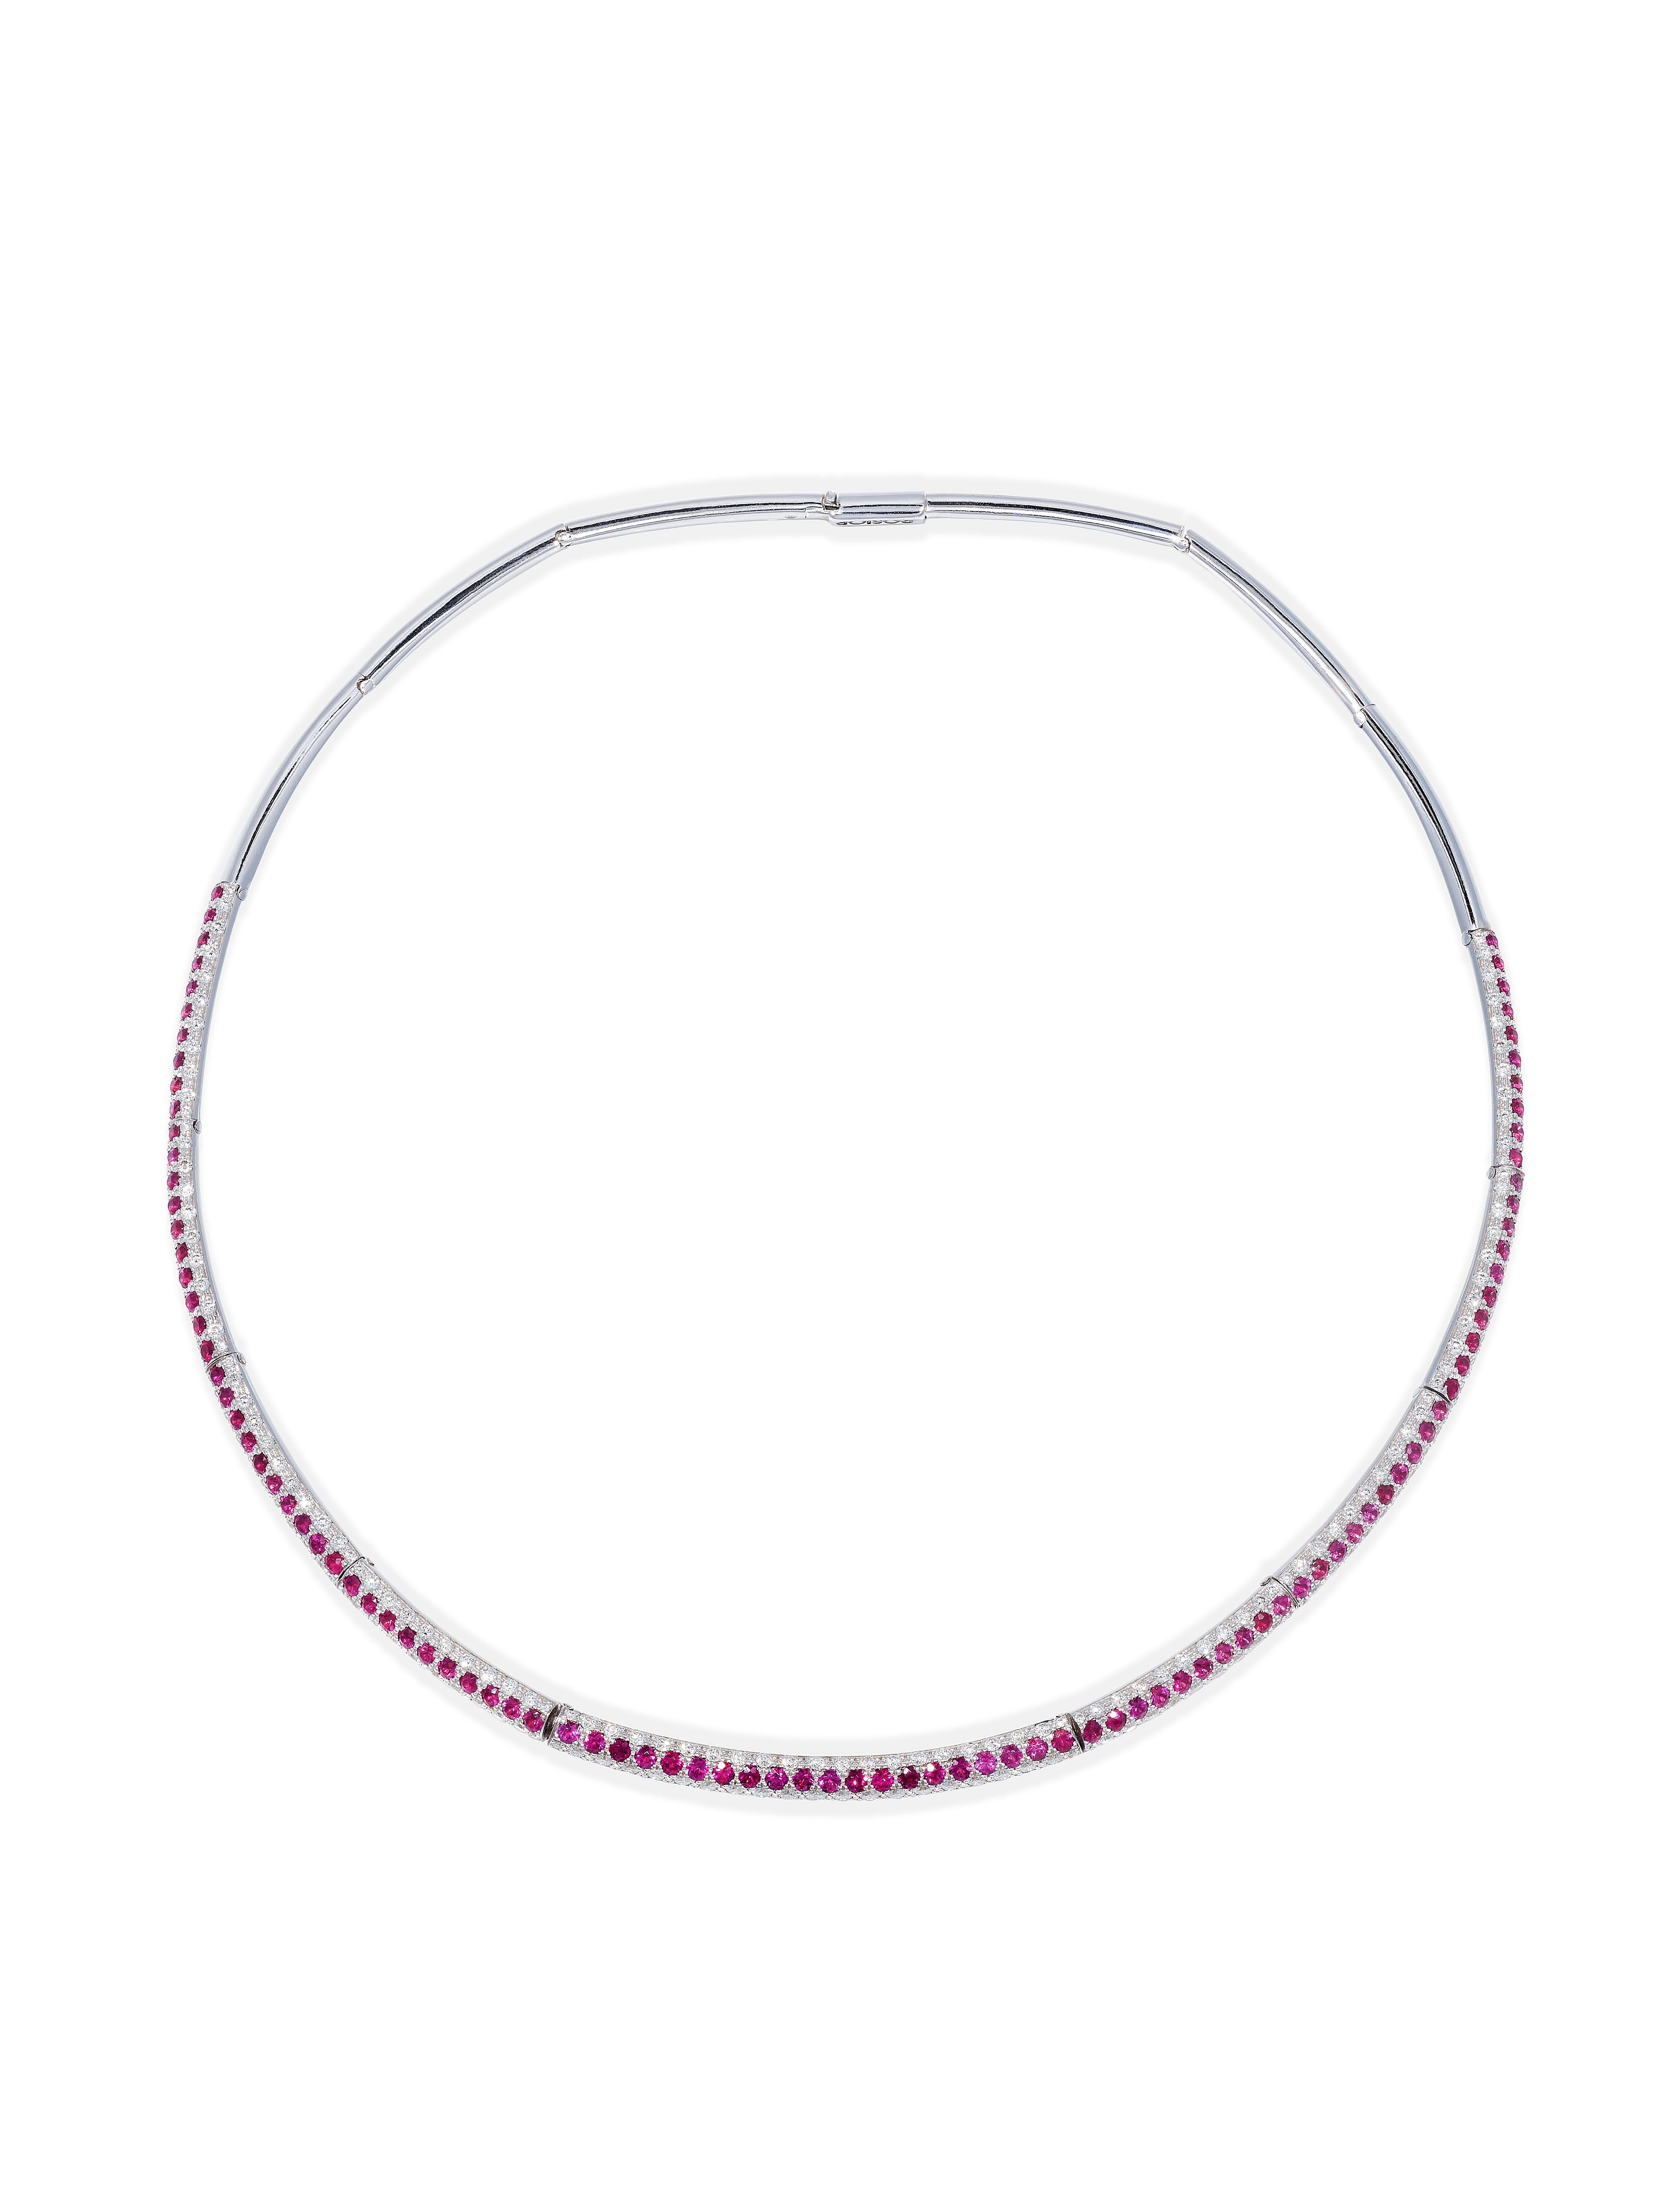 A Rosior Collar Necklace set in White Gold and set with:
- 218 F Color, VVS Clarity Diamonds weighing 3,39 ct;
- 100 Rubies weighing 4,34 ct.
Weight in 19.2K Gold: 38.5 g.
Unique piece.
Stamped by the portuguese assay office as 19.2K gold.
Stamped